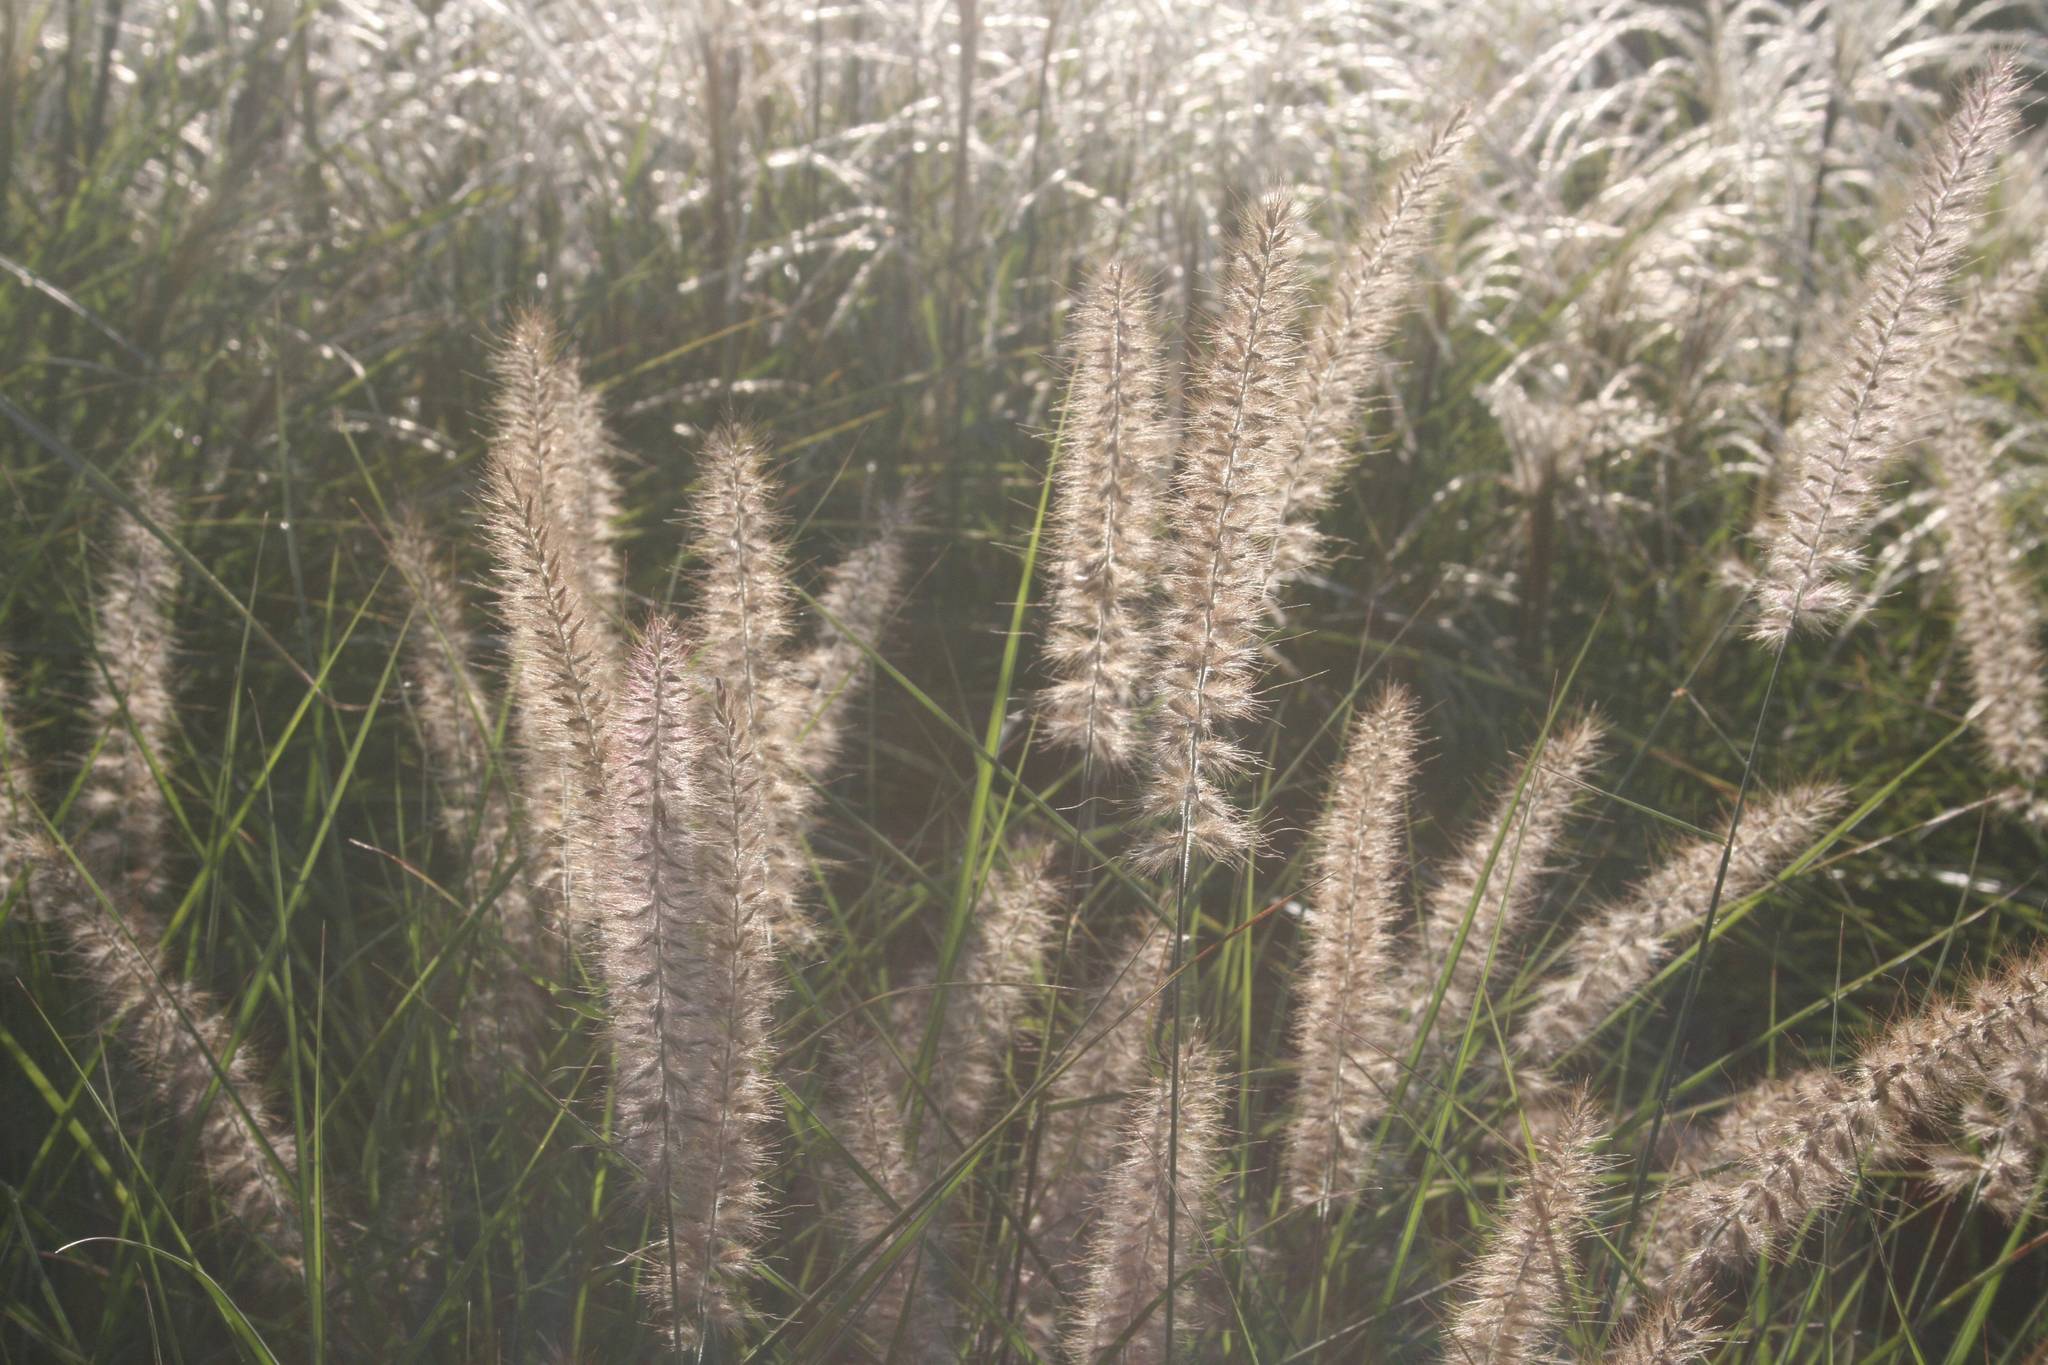 This Aug. 19, 2008 photo of backlit grasses taken at Fordhook Farm in Doylestown, Penn., shows how fine-textured plants can accentuate gardens at certain times of the day. Color is primary in garden planning but visual texture is an important design fundamental adding interest. (Dean Fosdick via AP)